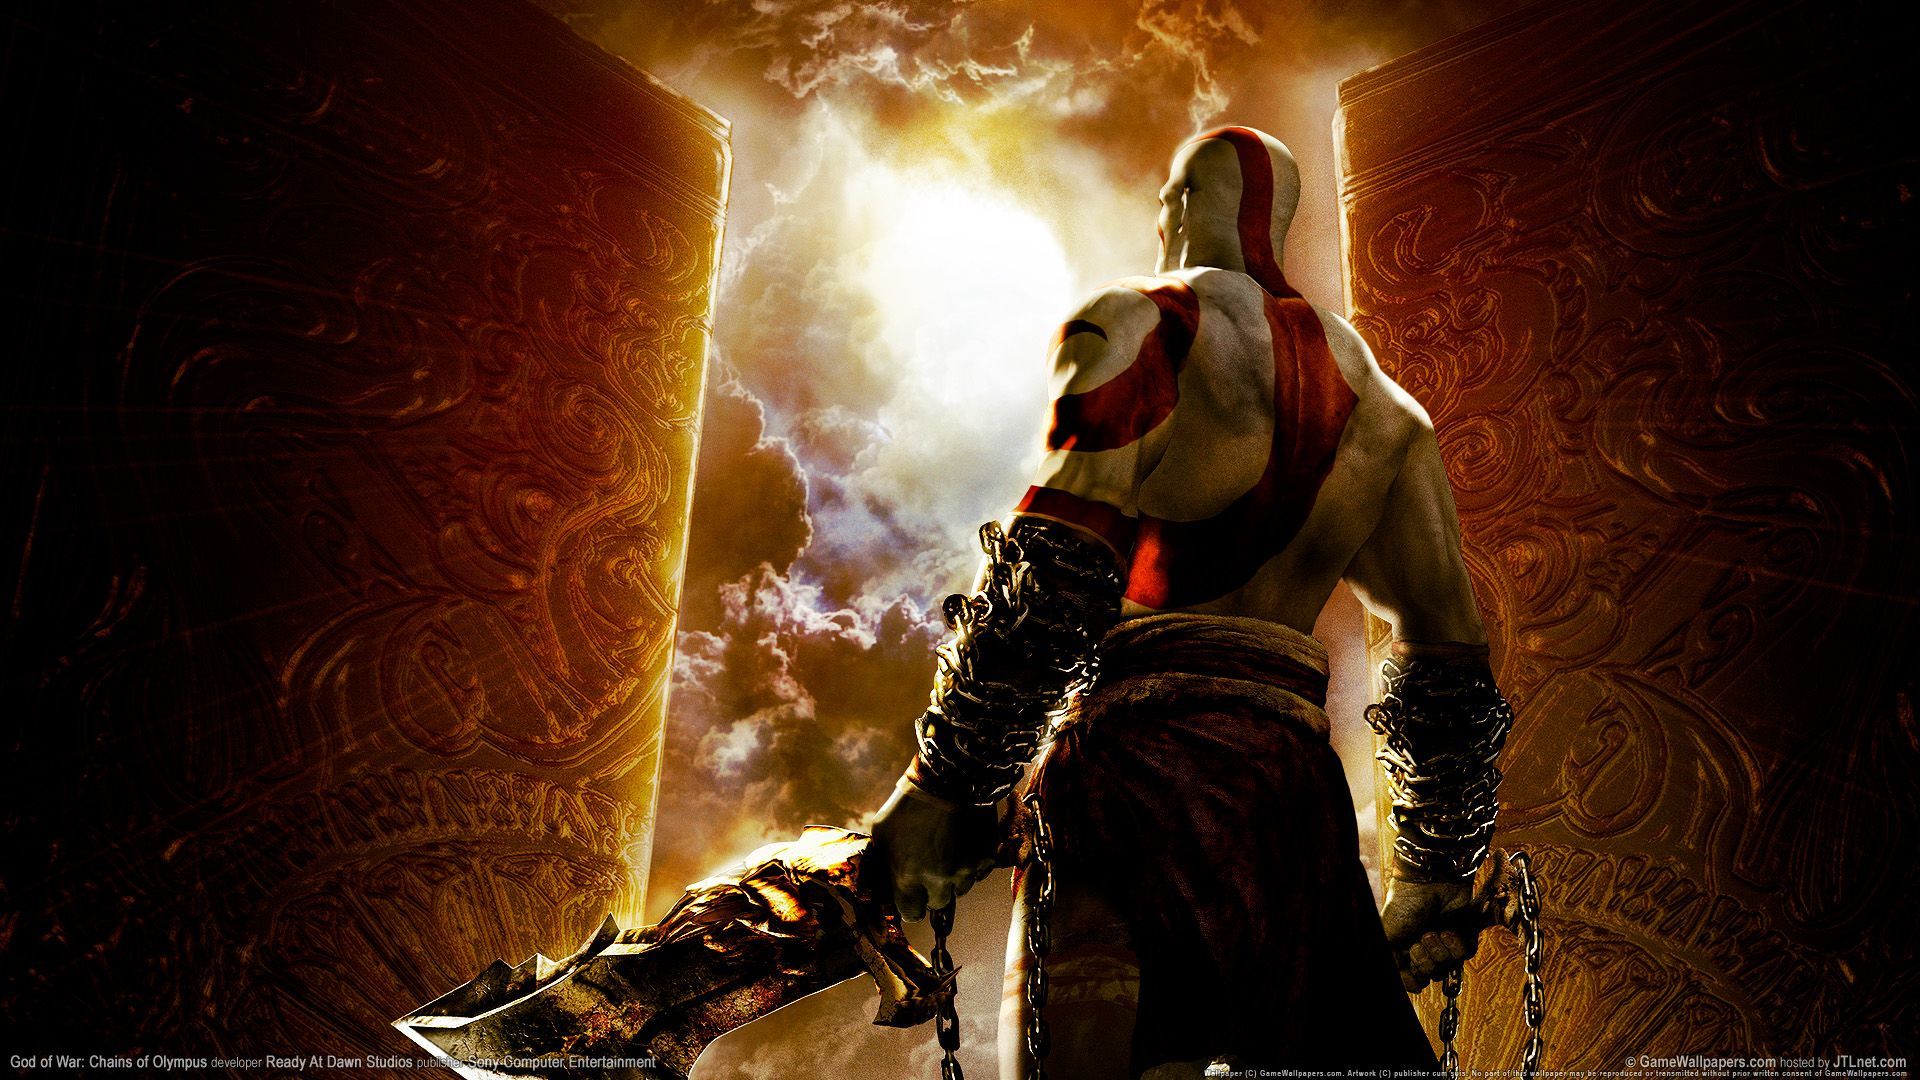 God of war chains of olympus Wallpaper. HD Wallpaper. Kratos god of war, God of war, God of war game